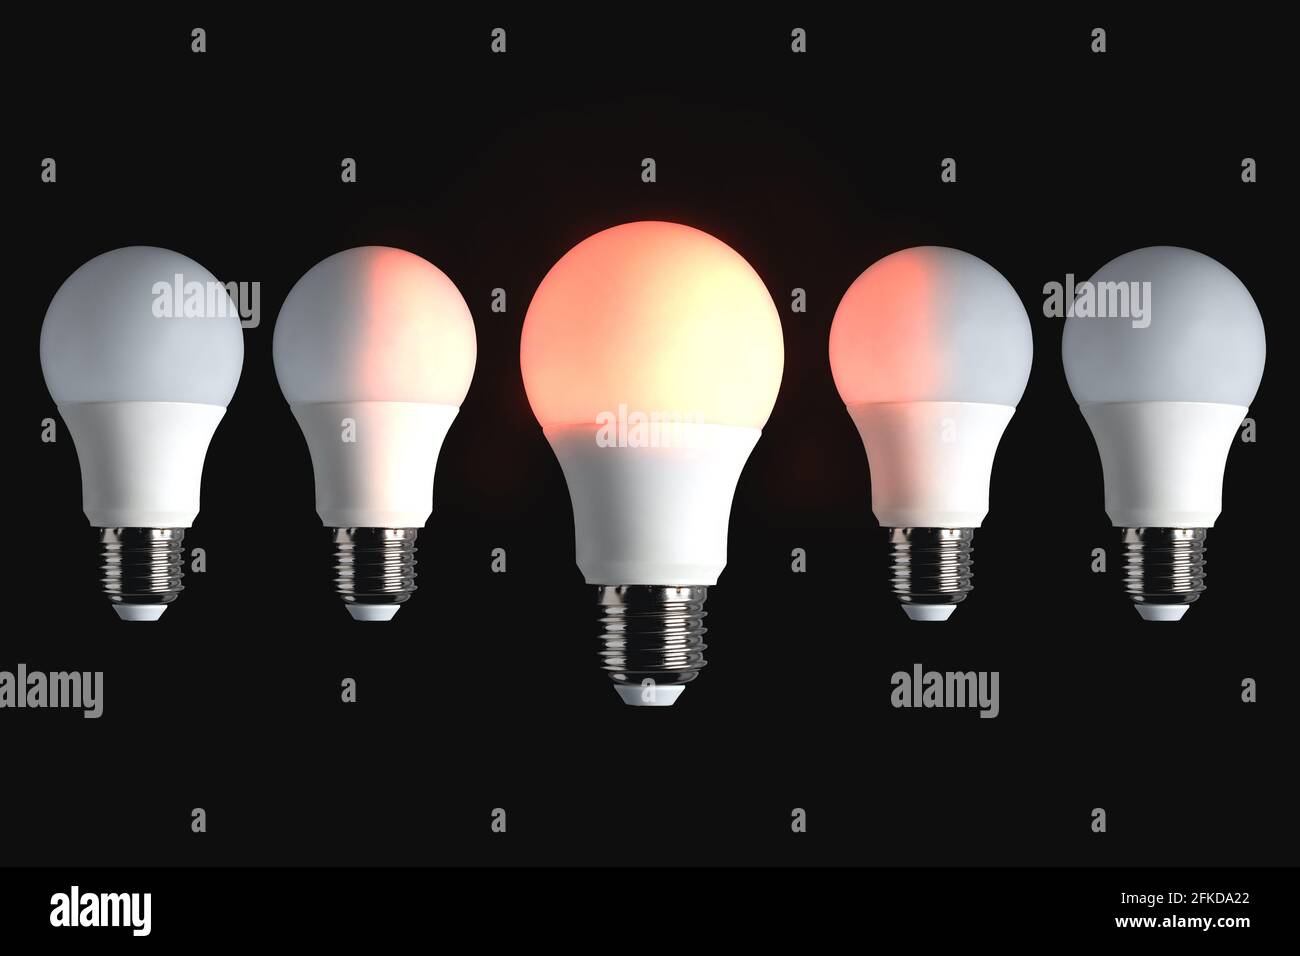 Red glowing bulb on black background. Idea, creativity, energy, invention, innovation, influence, leadership concept. Stock Photo